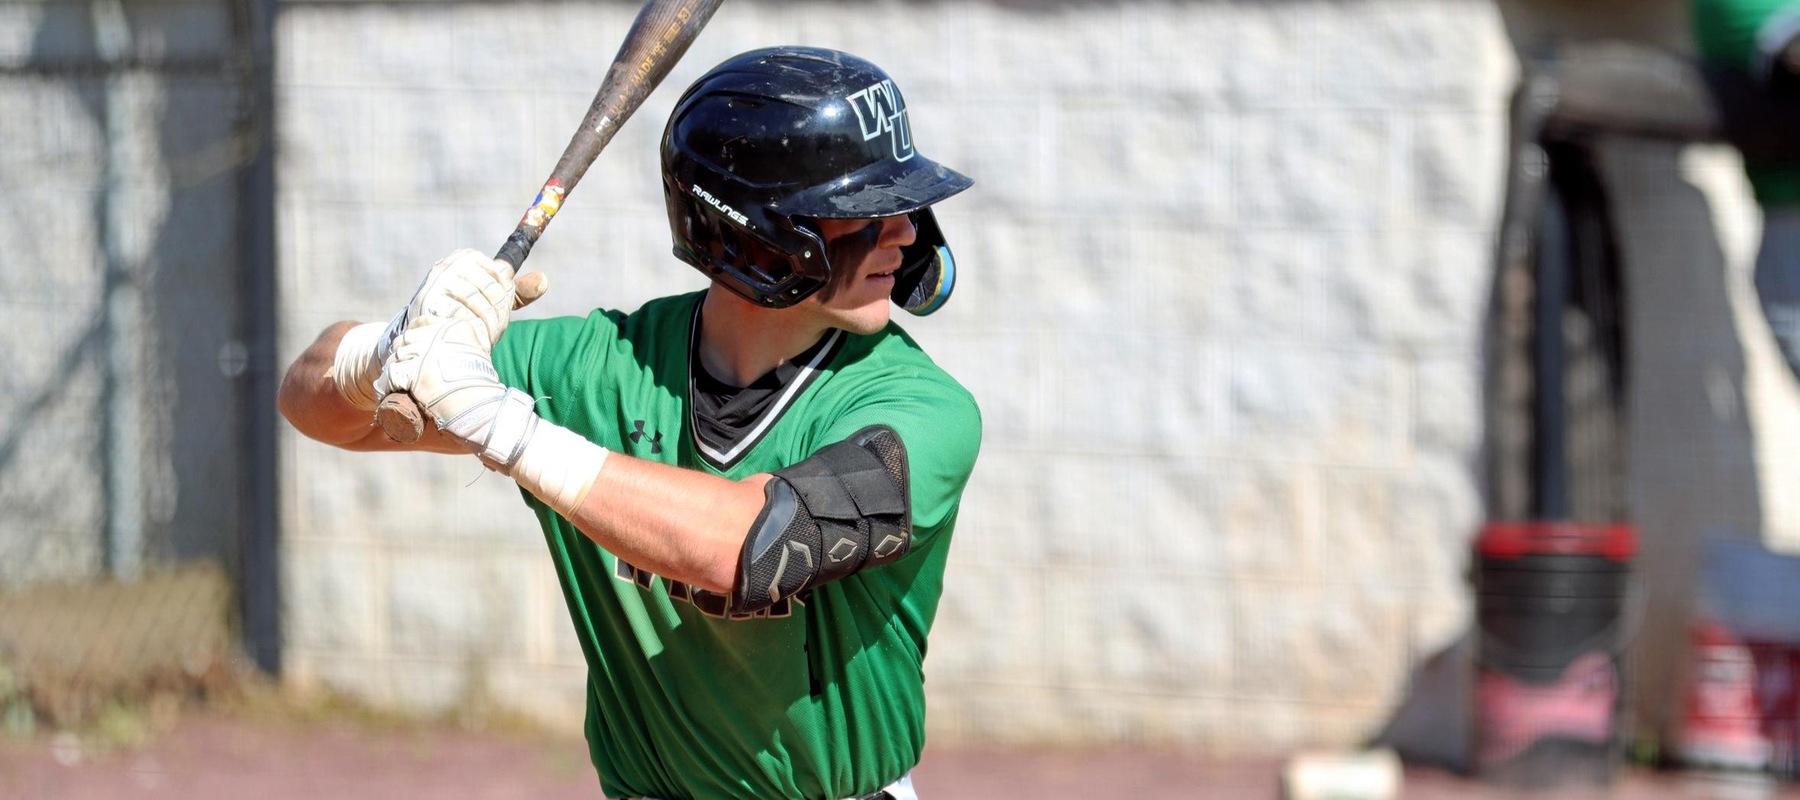 Photo of Sean Glatts who batted 3-for-4 with three RBI at Goldey-Beacom. Copyright 2024; Wilmington University. All rights reserved. Photo by Dan Lauletta, April 23, 2024 at Goldey-Beacom.